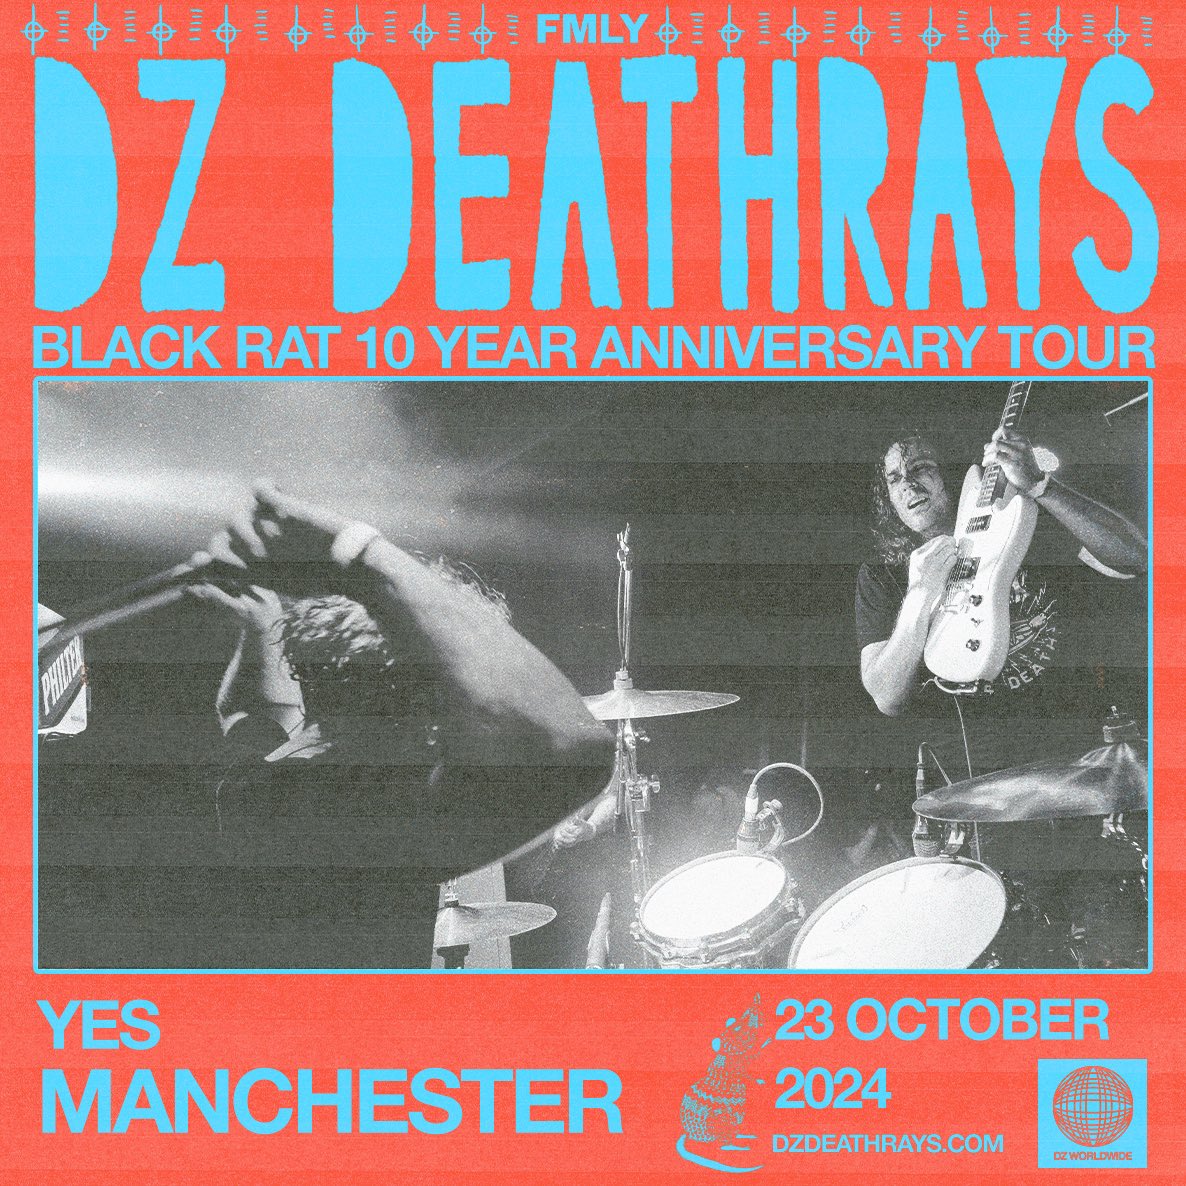 NEW SHOW… @DZDEATHRAYS head to YES on October 23rd, celebrating the 10th anniversary of their cult record ‘Black Rat’. Tickets on sale Thursday at 10am.